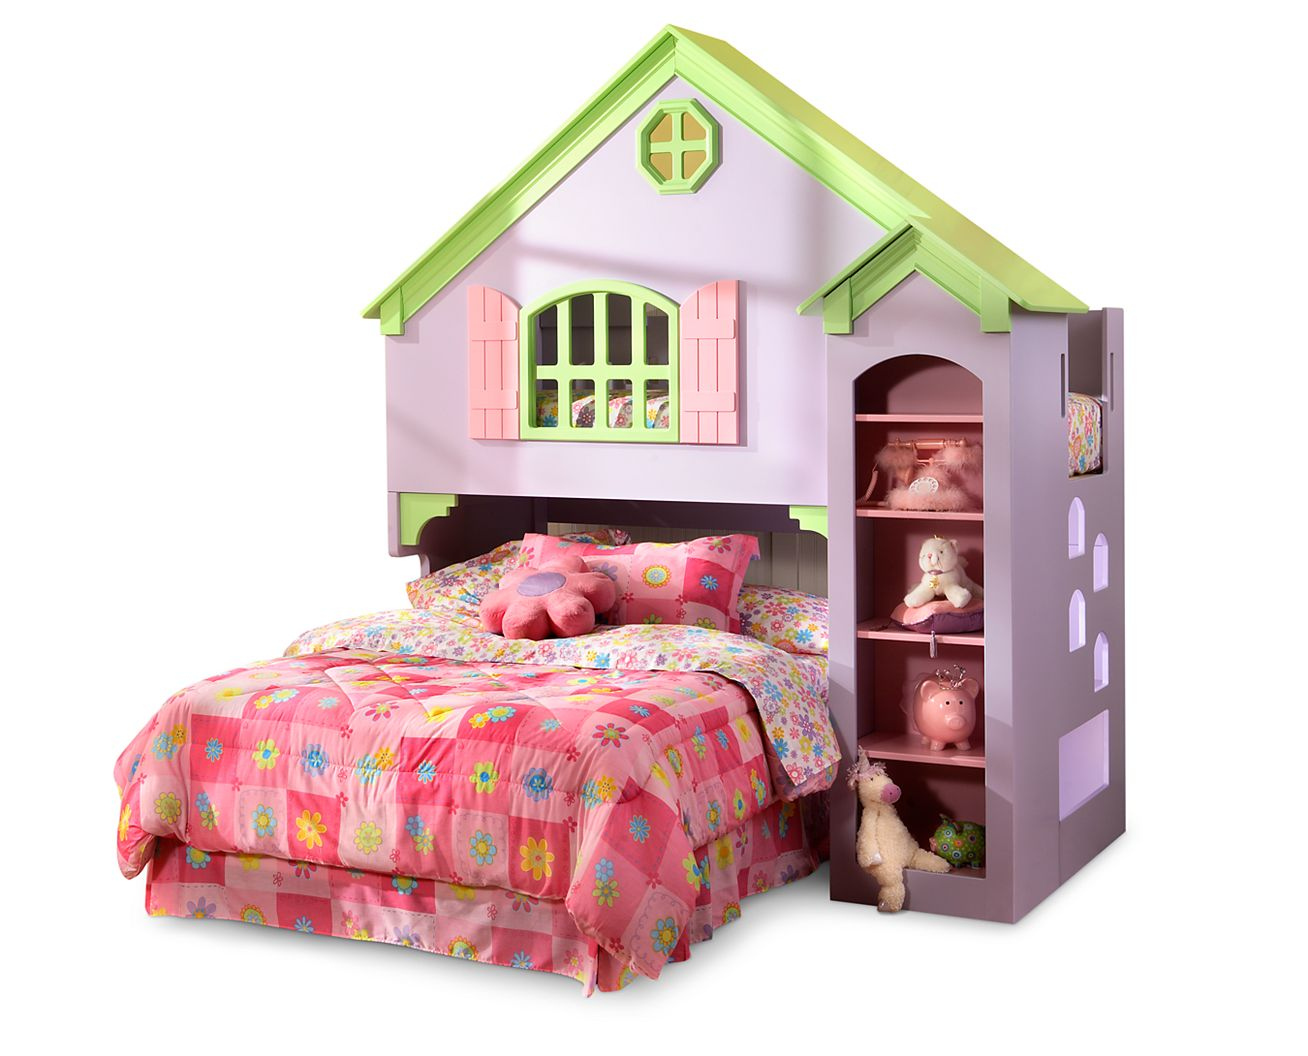 20 Features You Should Know About Dollhouse Bedroom Furniture For Kids 